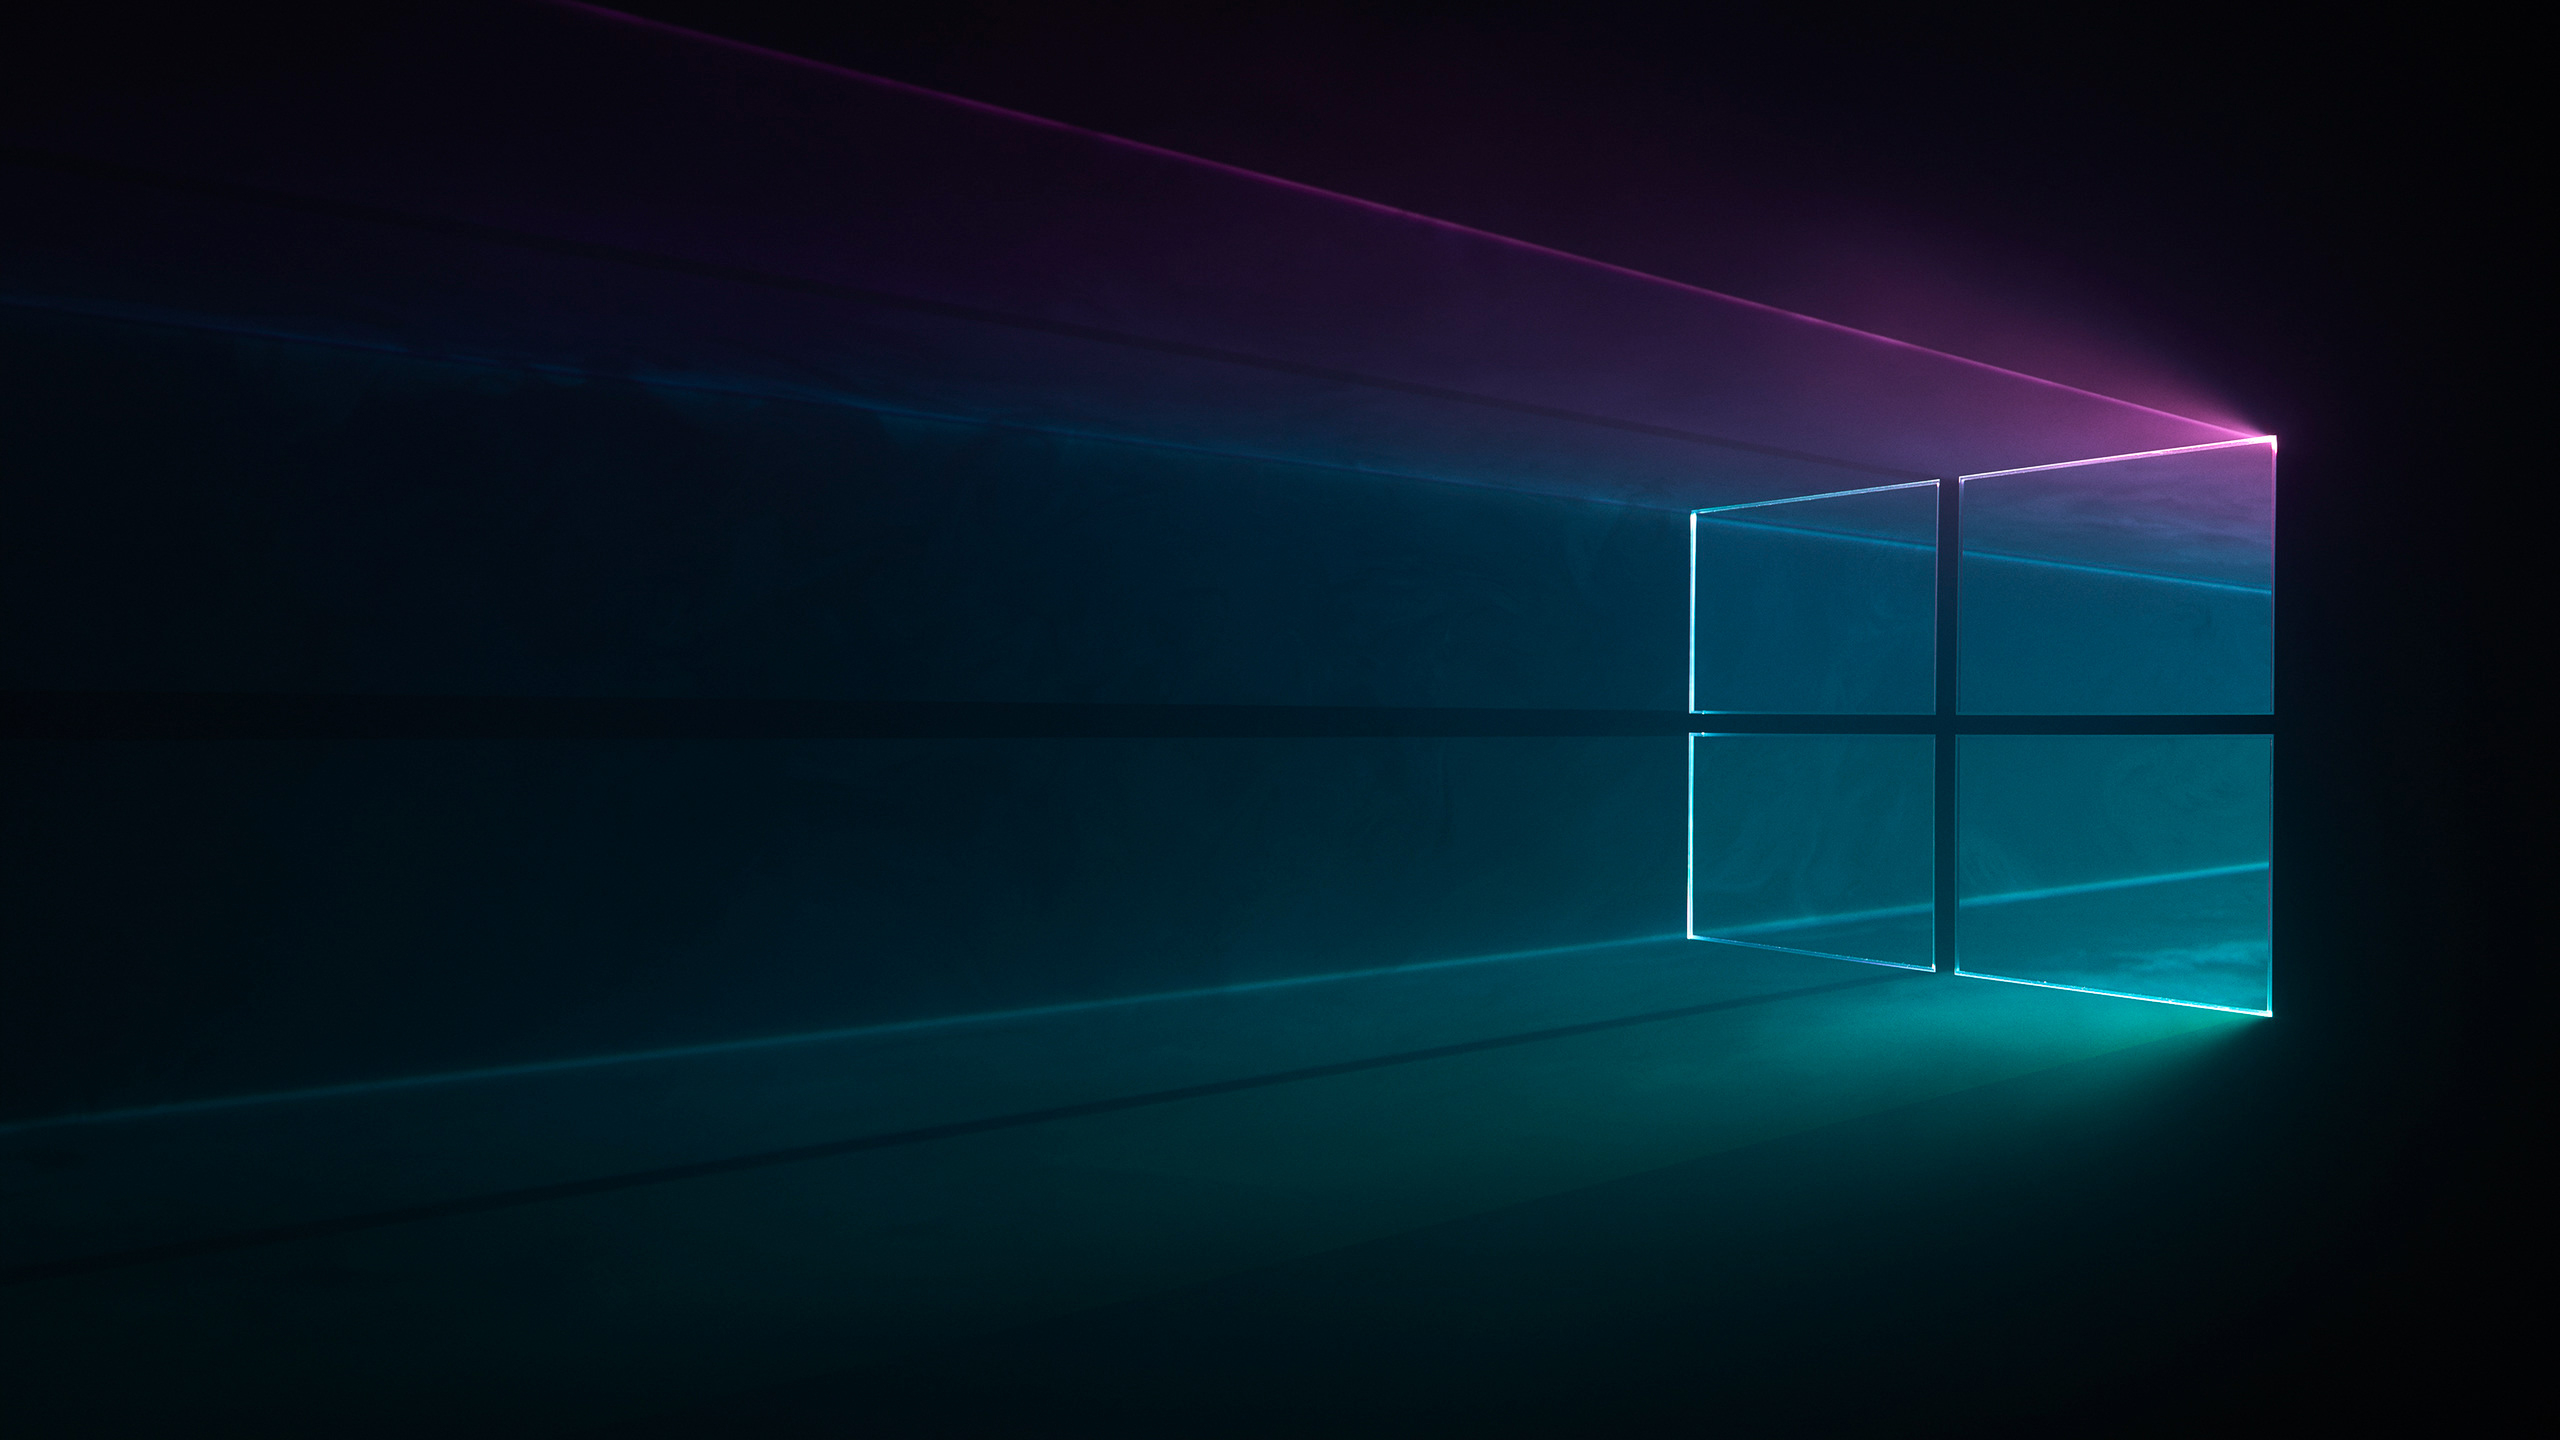 2560x1440 Windows 10 Dark 1440p Resolution Wallpaper Hd Hi Tech 4k Wallpapers Images Photos And Background